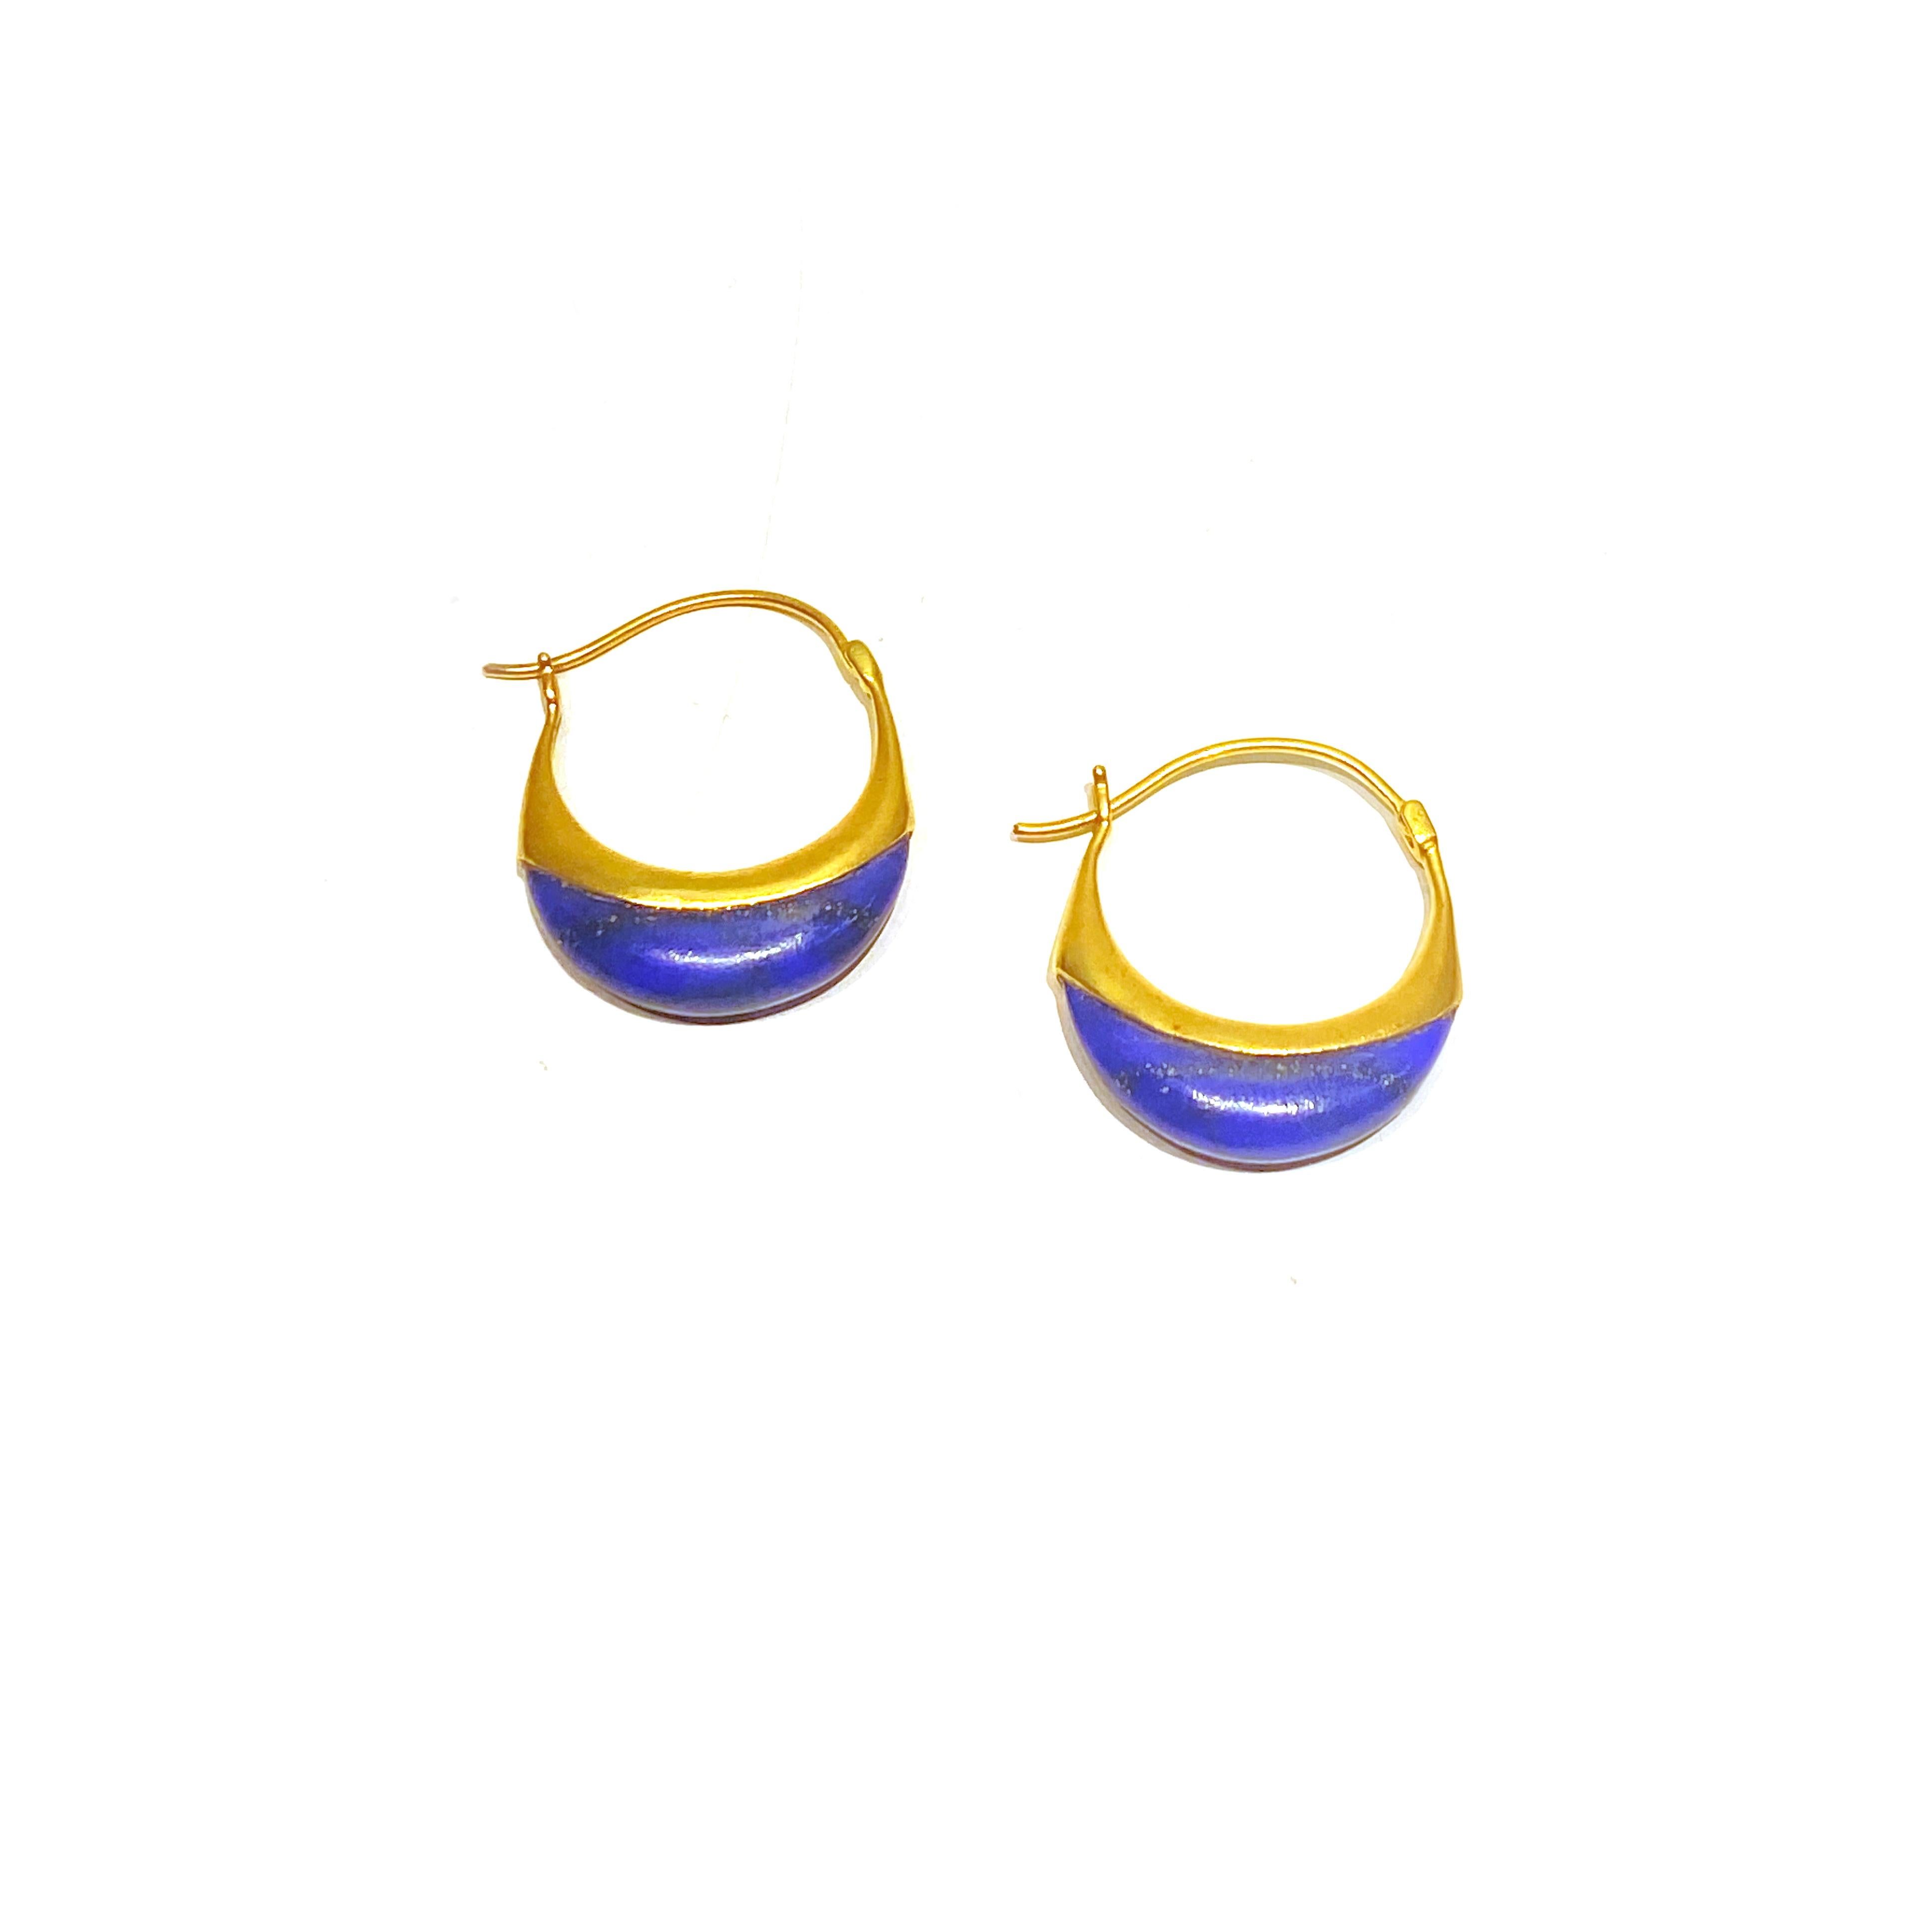 These earrings from designer Lauren Harper feature an elegant design with blue lapis and yellow gold. 

Details
Blue Lapis 
18K Yellow Gold 
Length 1 Inch